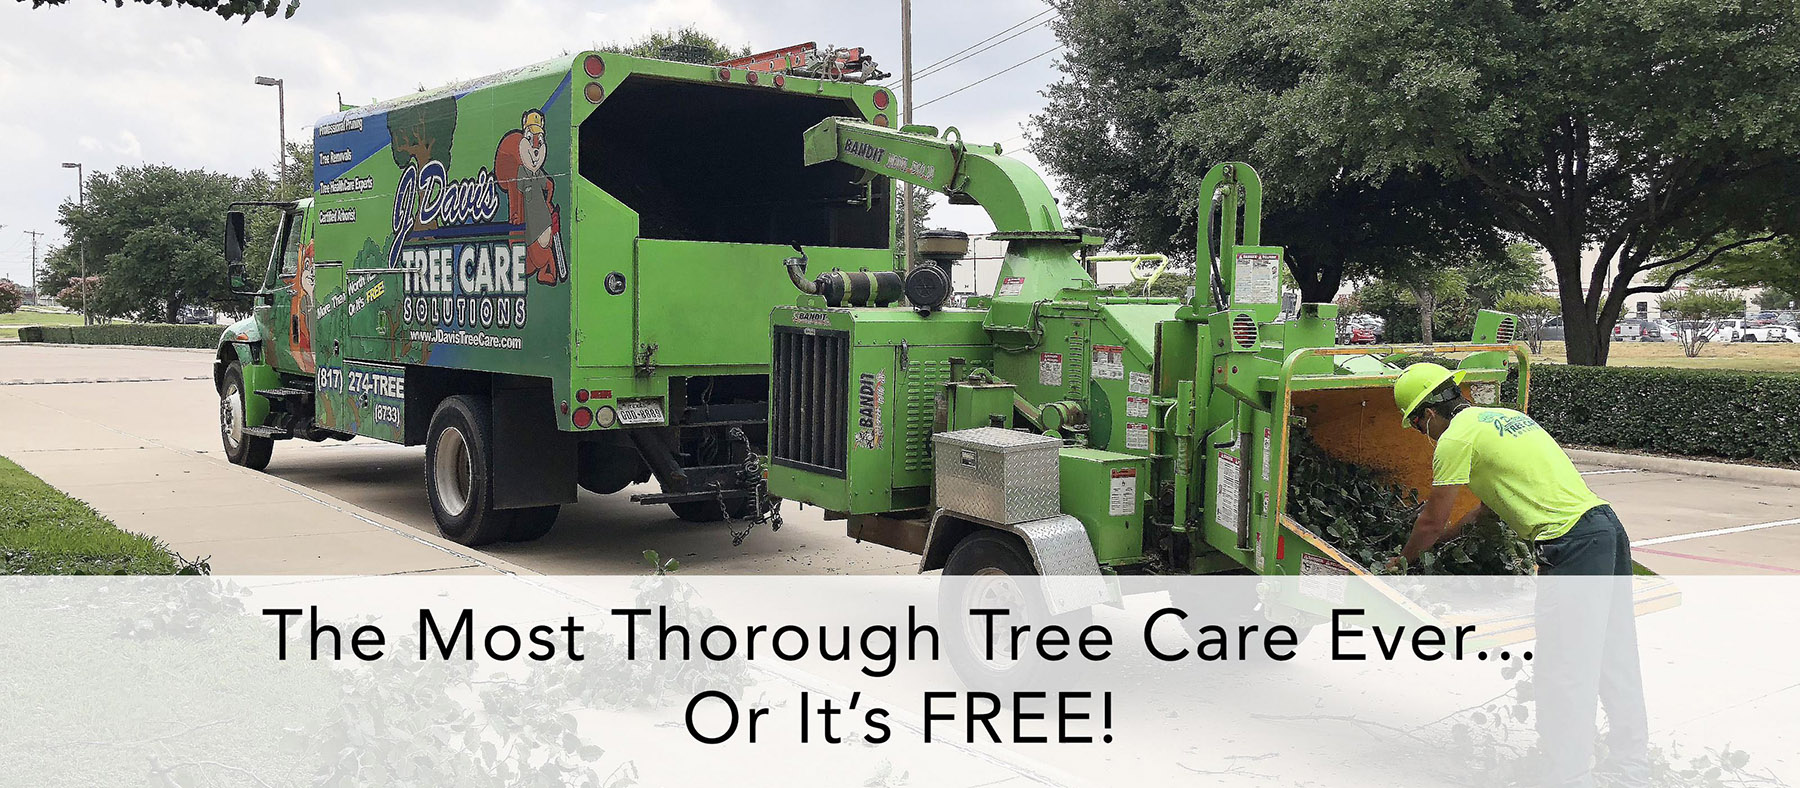 Haltom City Tree Trimming. How Experts Care for Trees